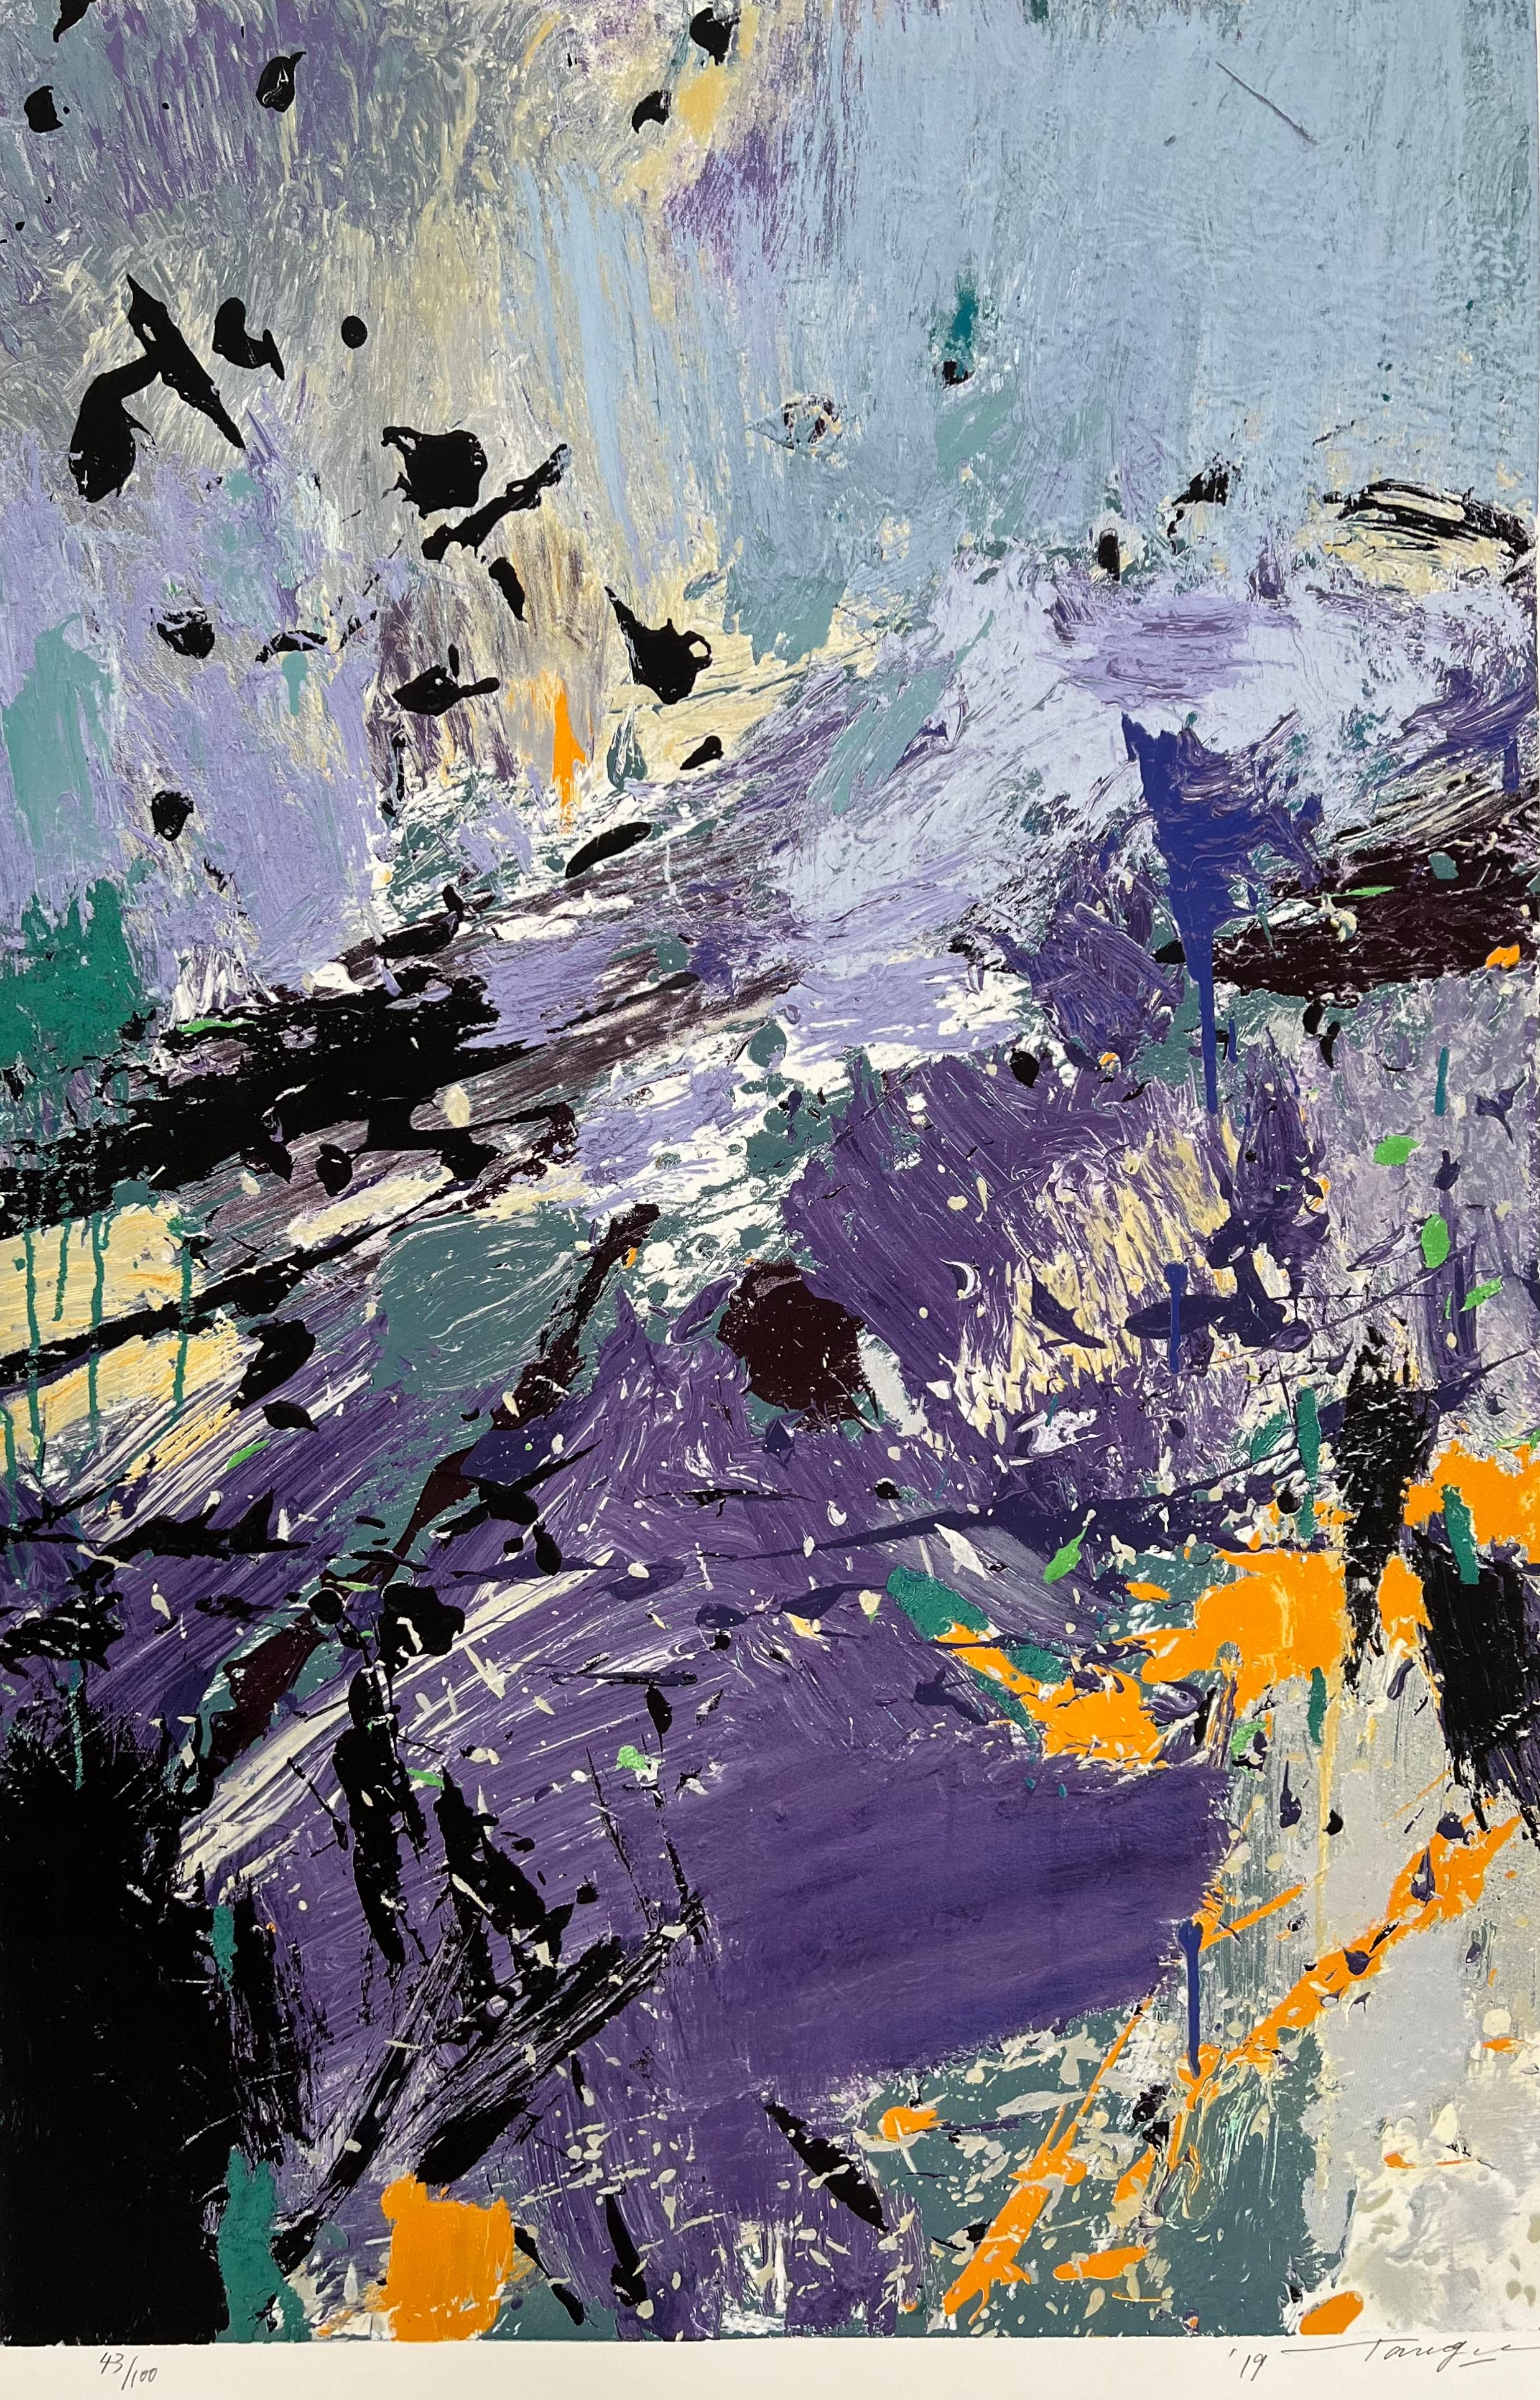 Abstract Expressionist Prints  - Long Night 